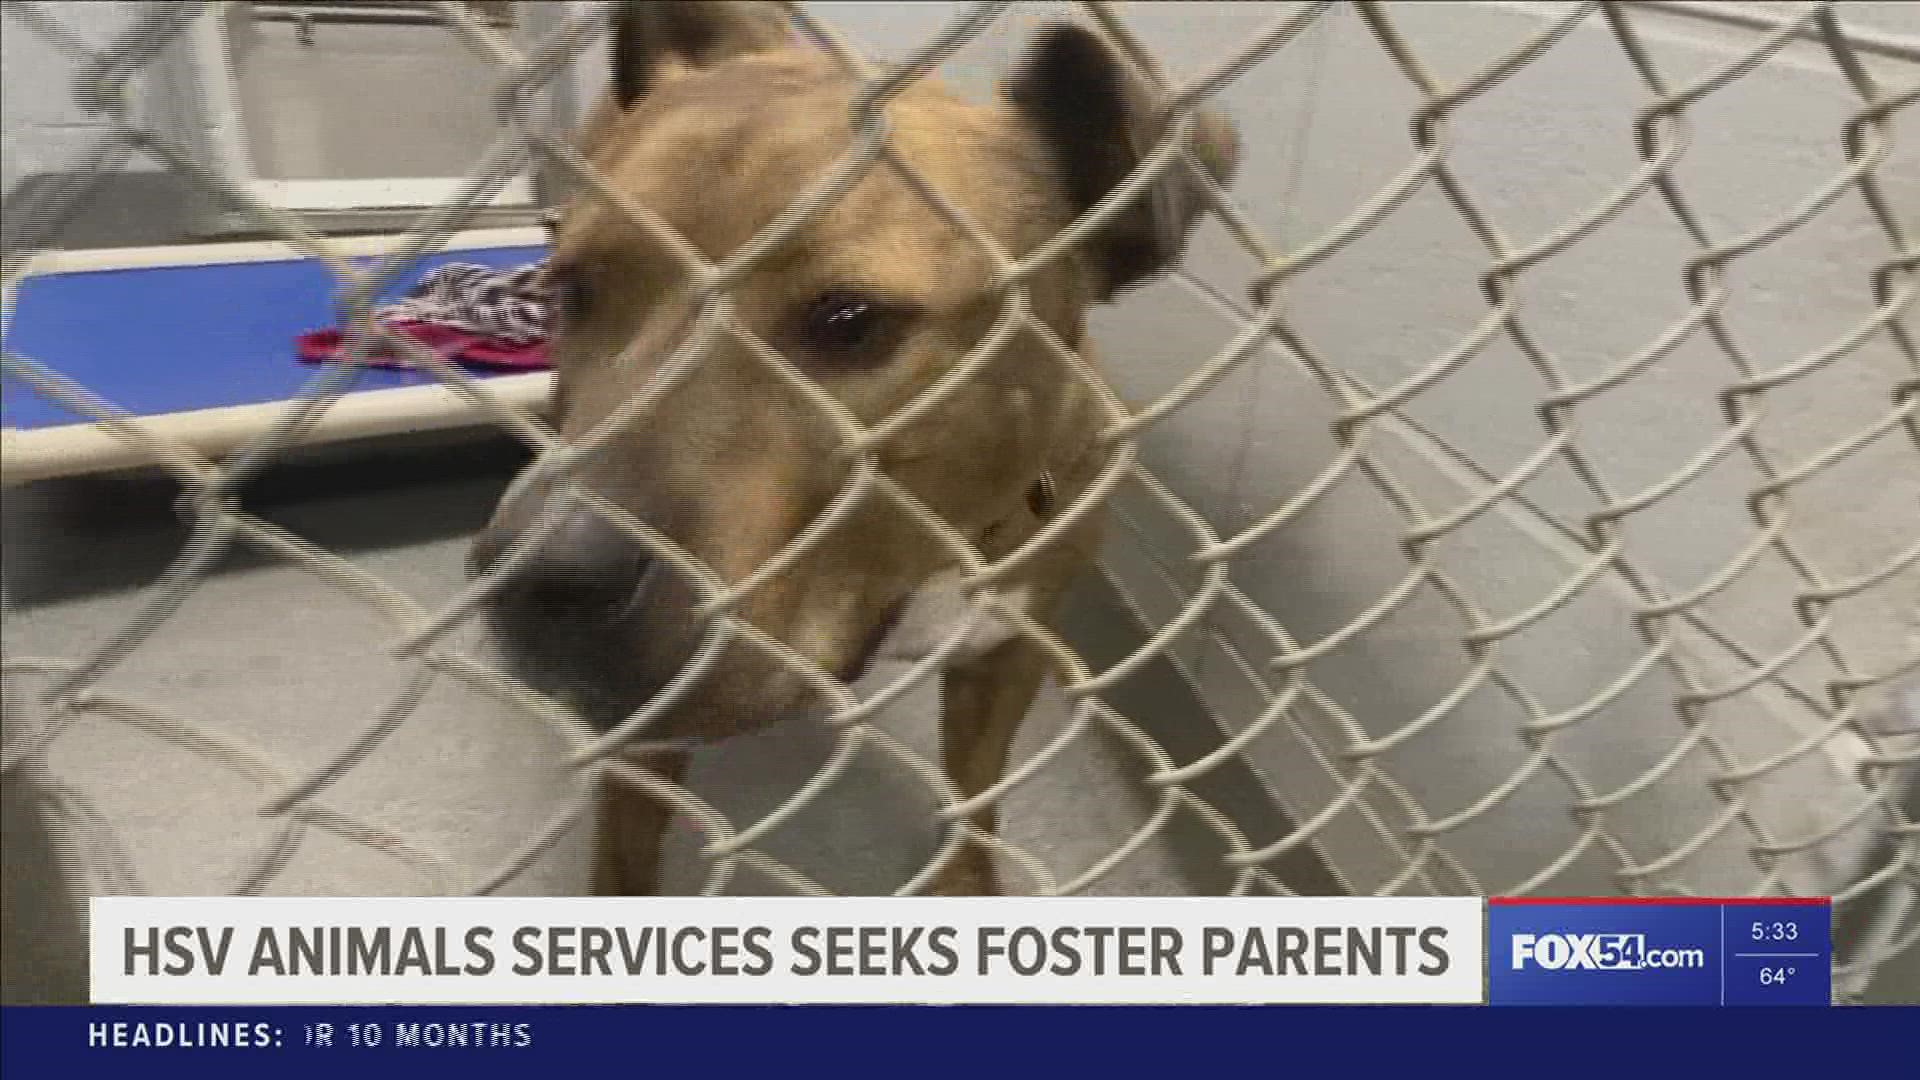 Huntsville Animal services is seeking holiday foster parents for their fur babies.